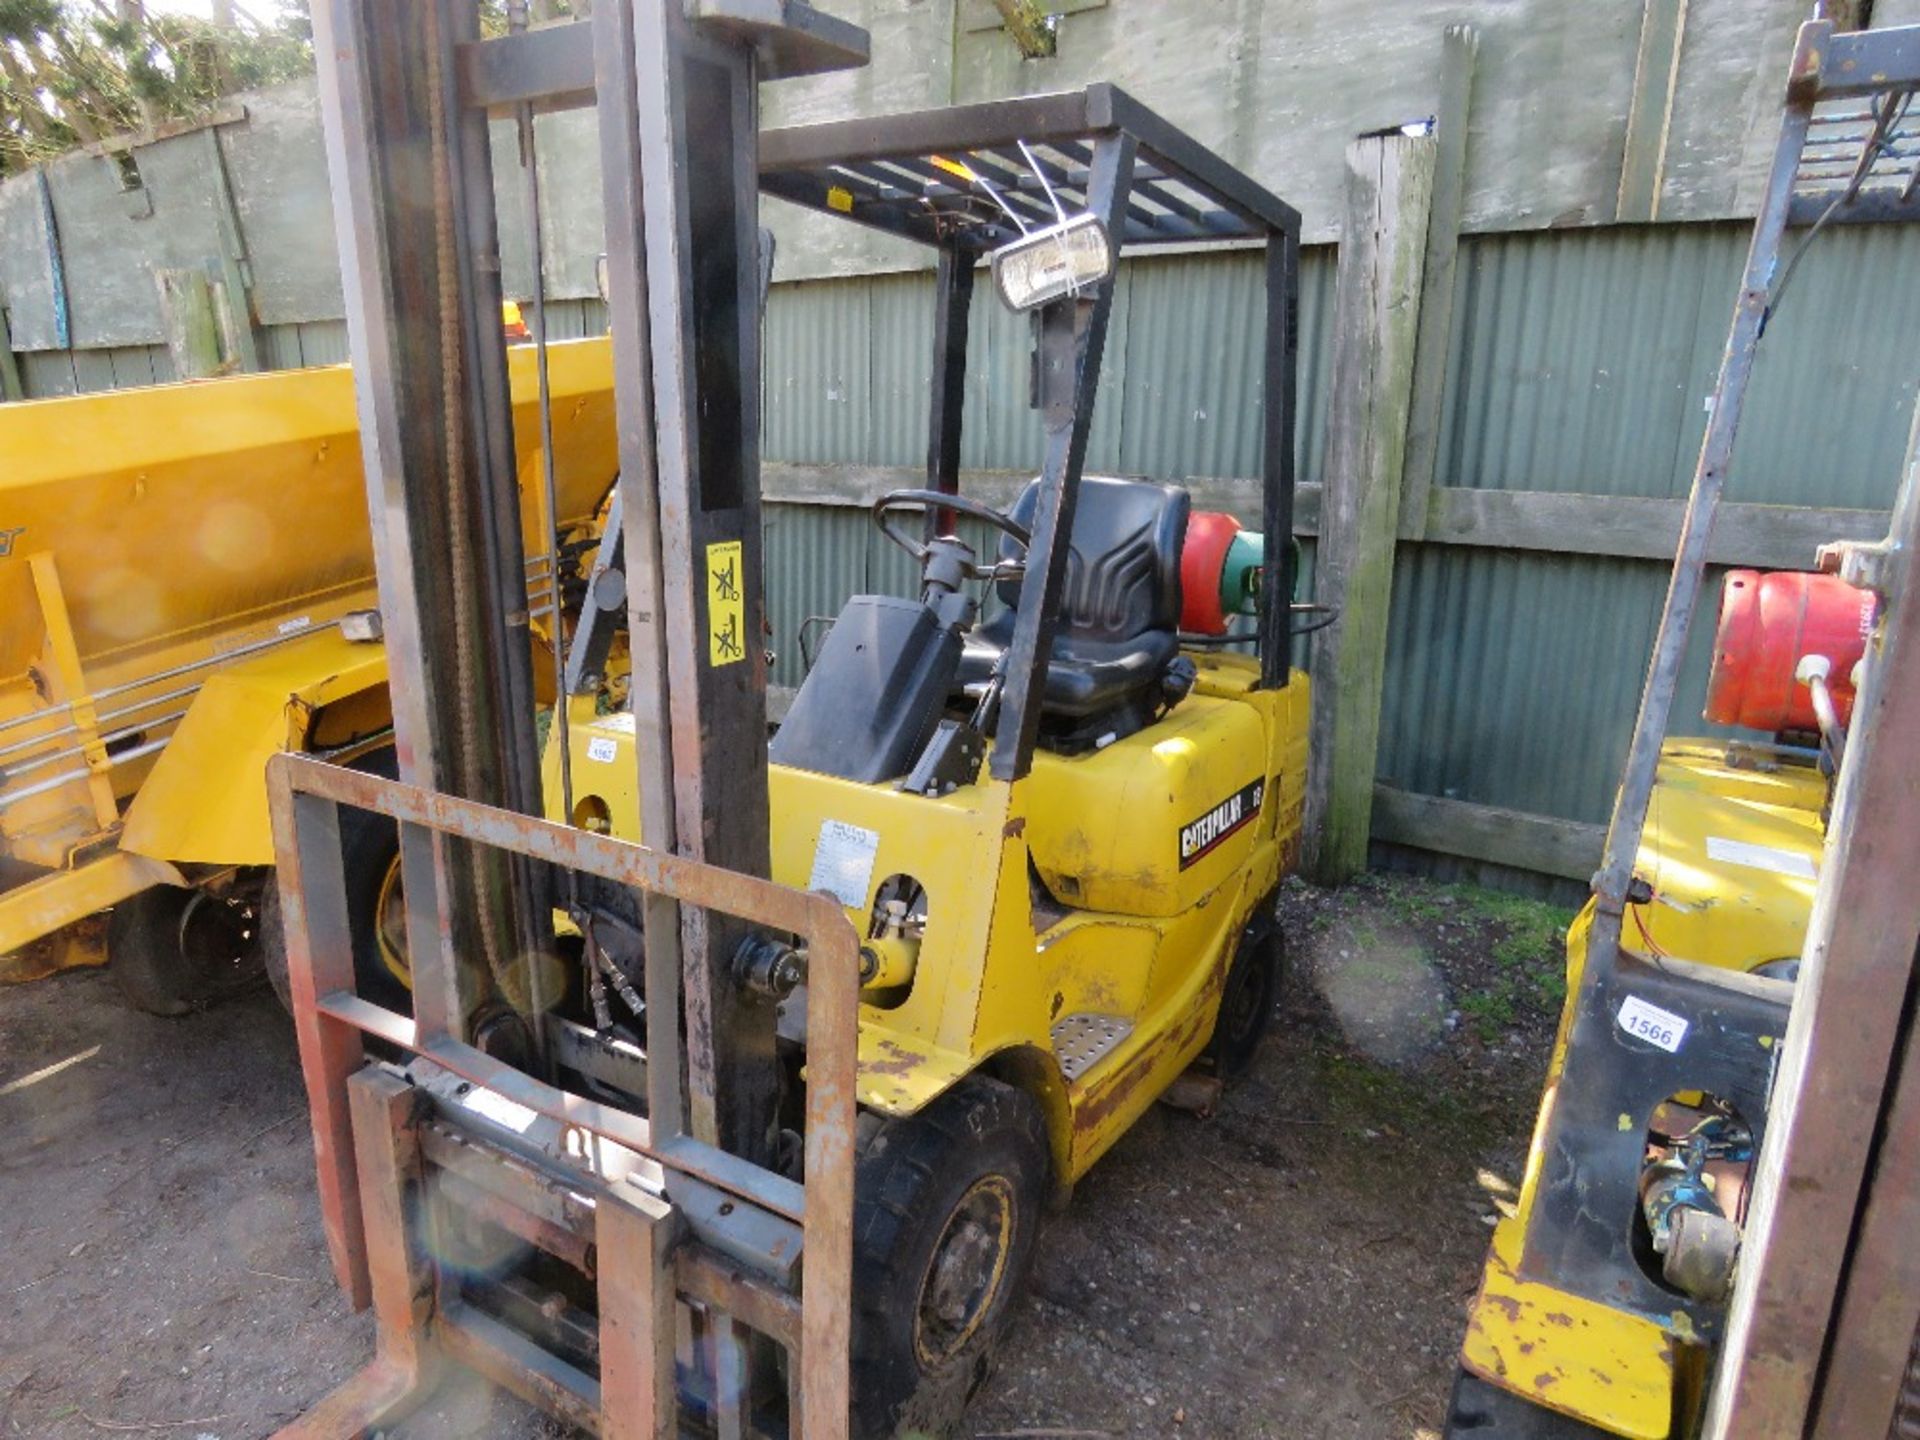 CATERPILLAR GP18 GAS POWERED FORKLIFT. WHEN TESTED WAS SEEN TO START AND RUN BRIEFLY BUT CUTTING OUT